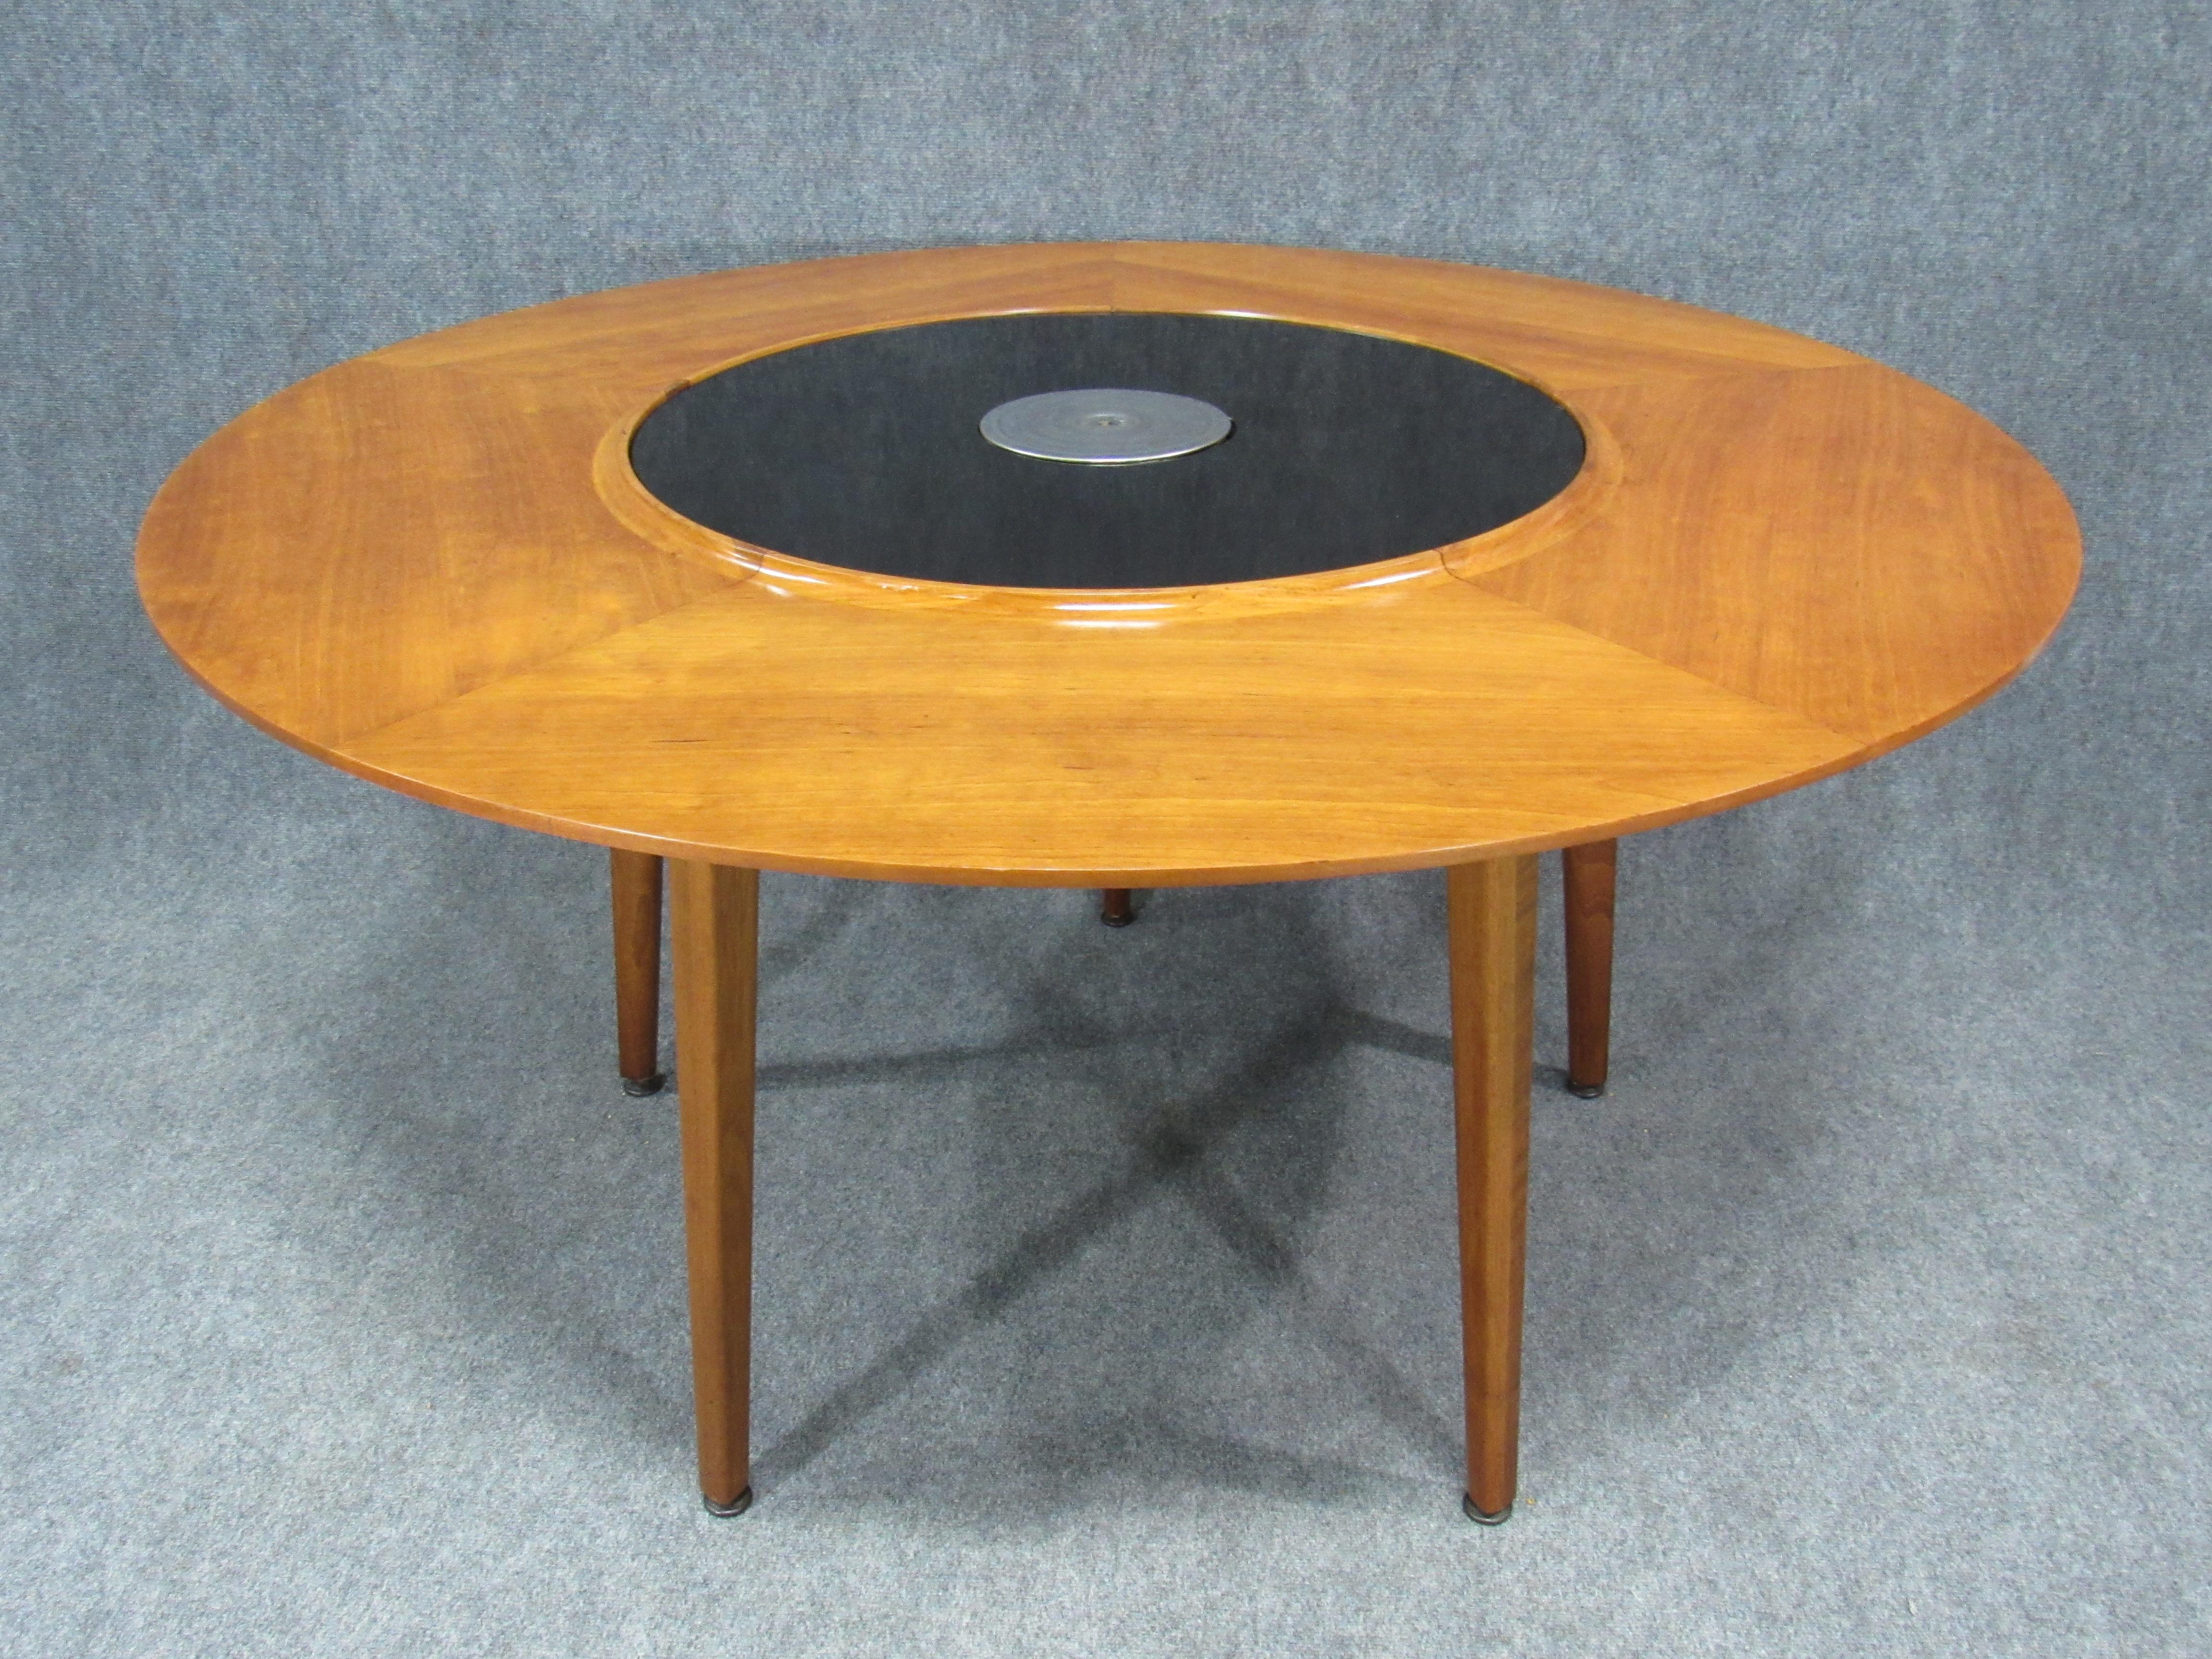 Lazy Susan dining table with interchangeable laminate spinning top. Warming unit in the middle of the top still functional. Great for fondue parties.
Signed with branded Dunbar.